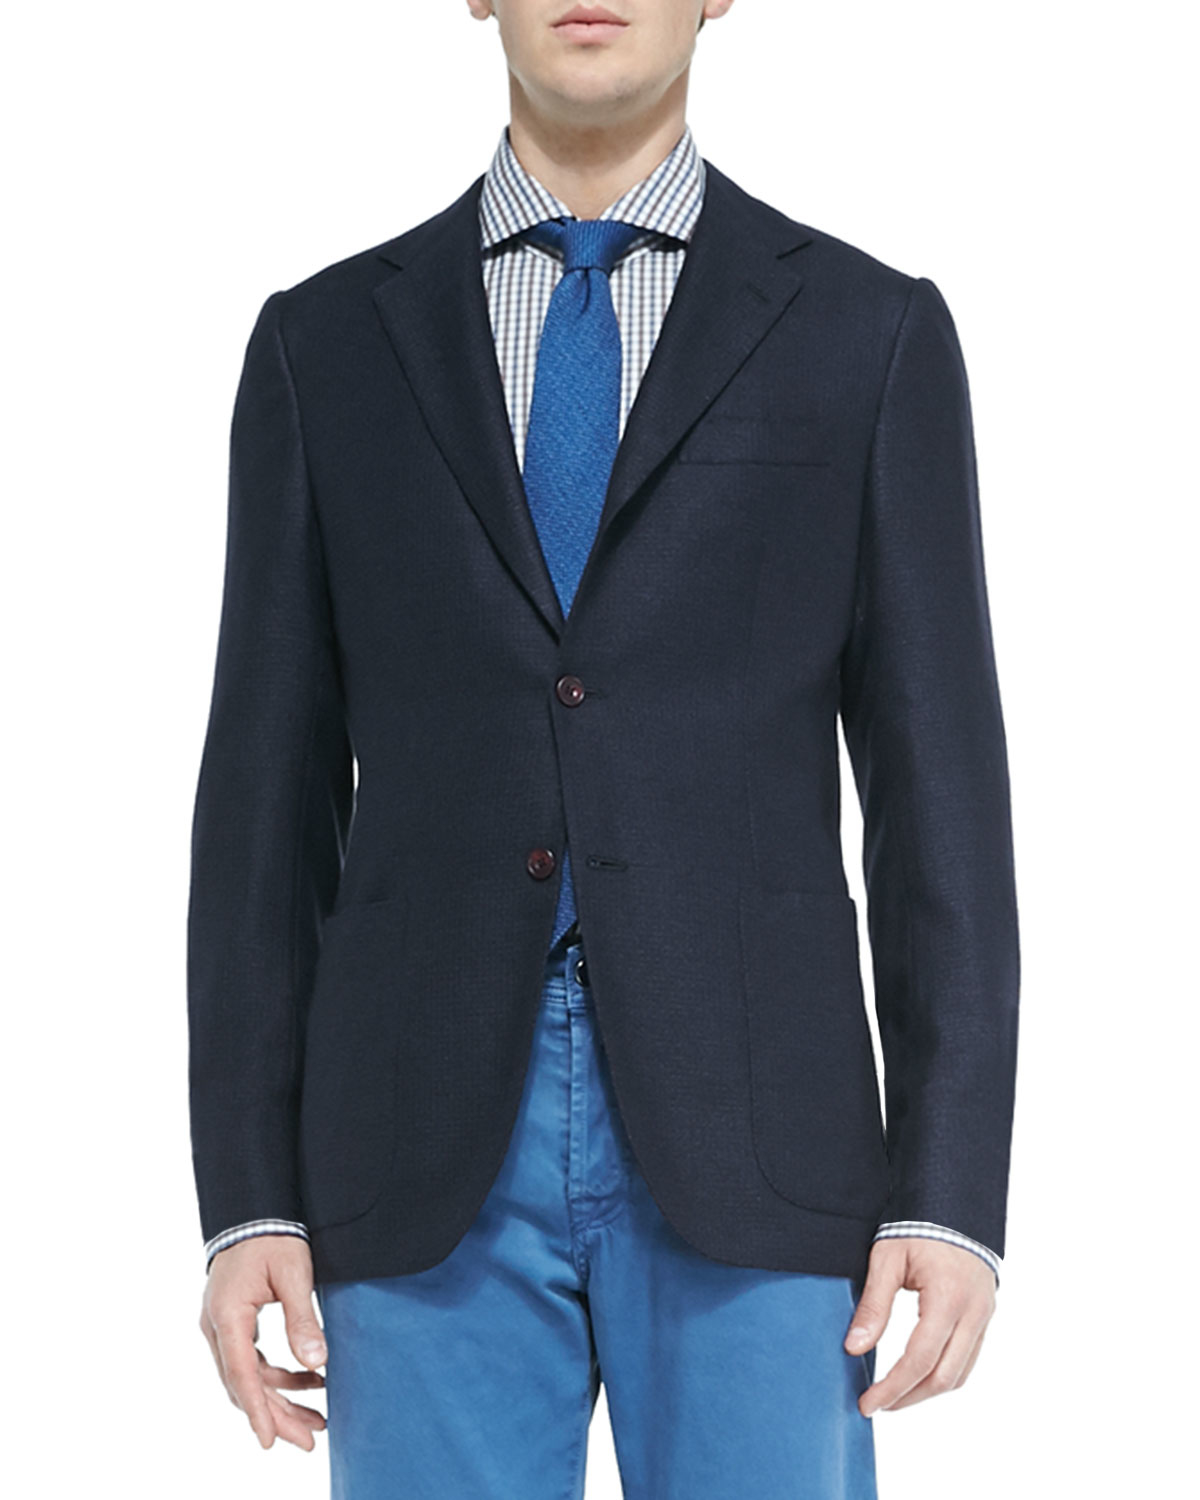 Lyst - Kiton Textured Three-button Sport Coat in Blue for Men